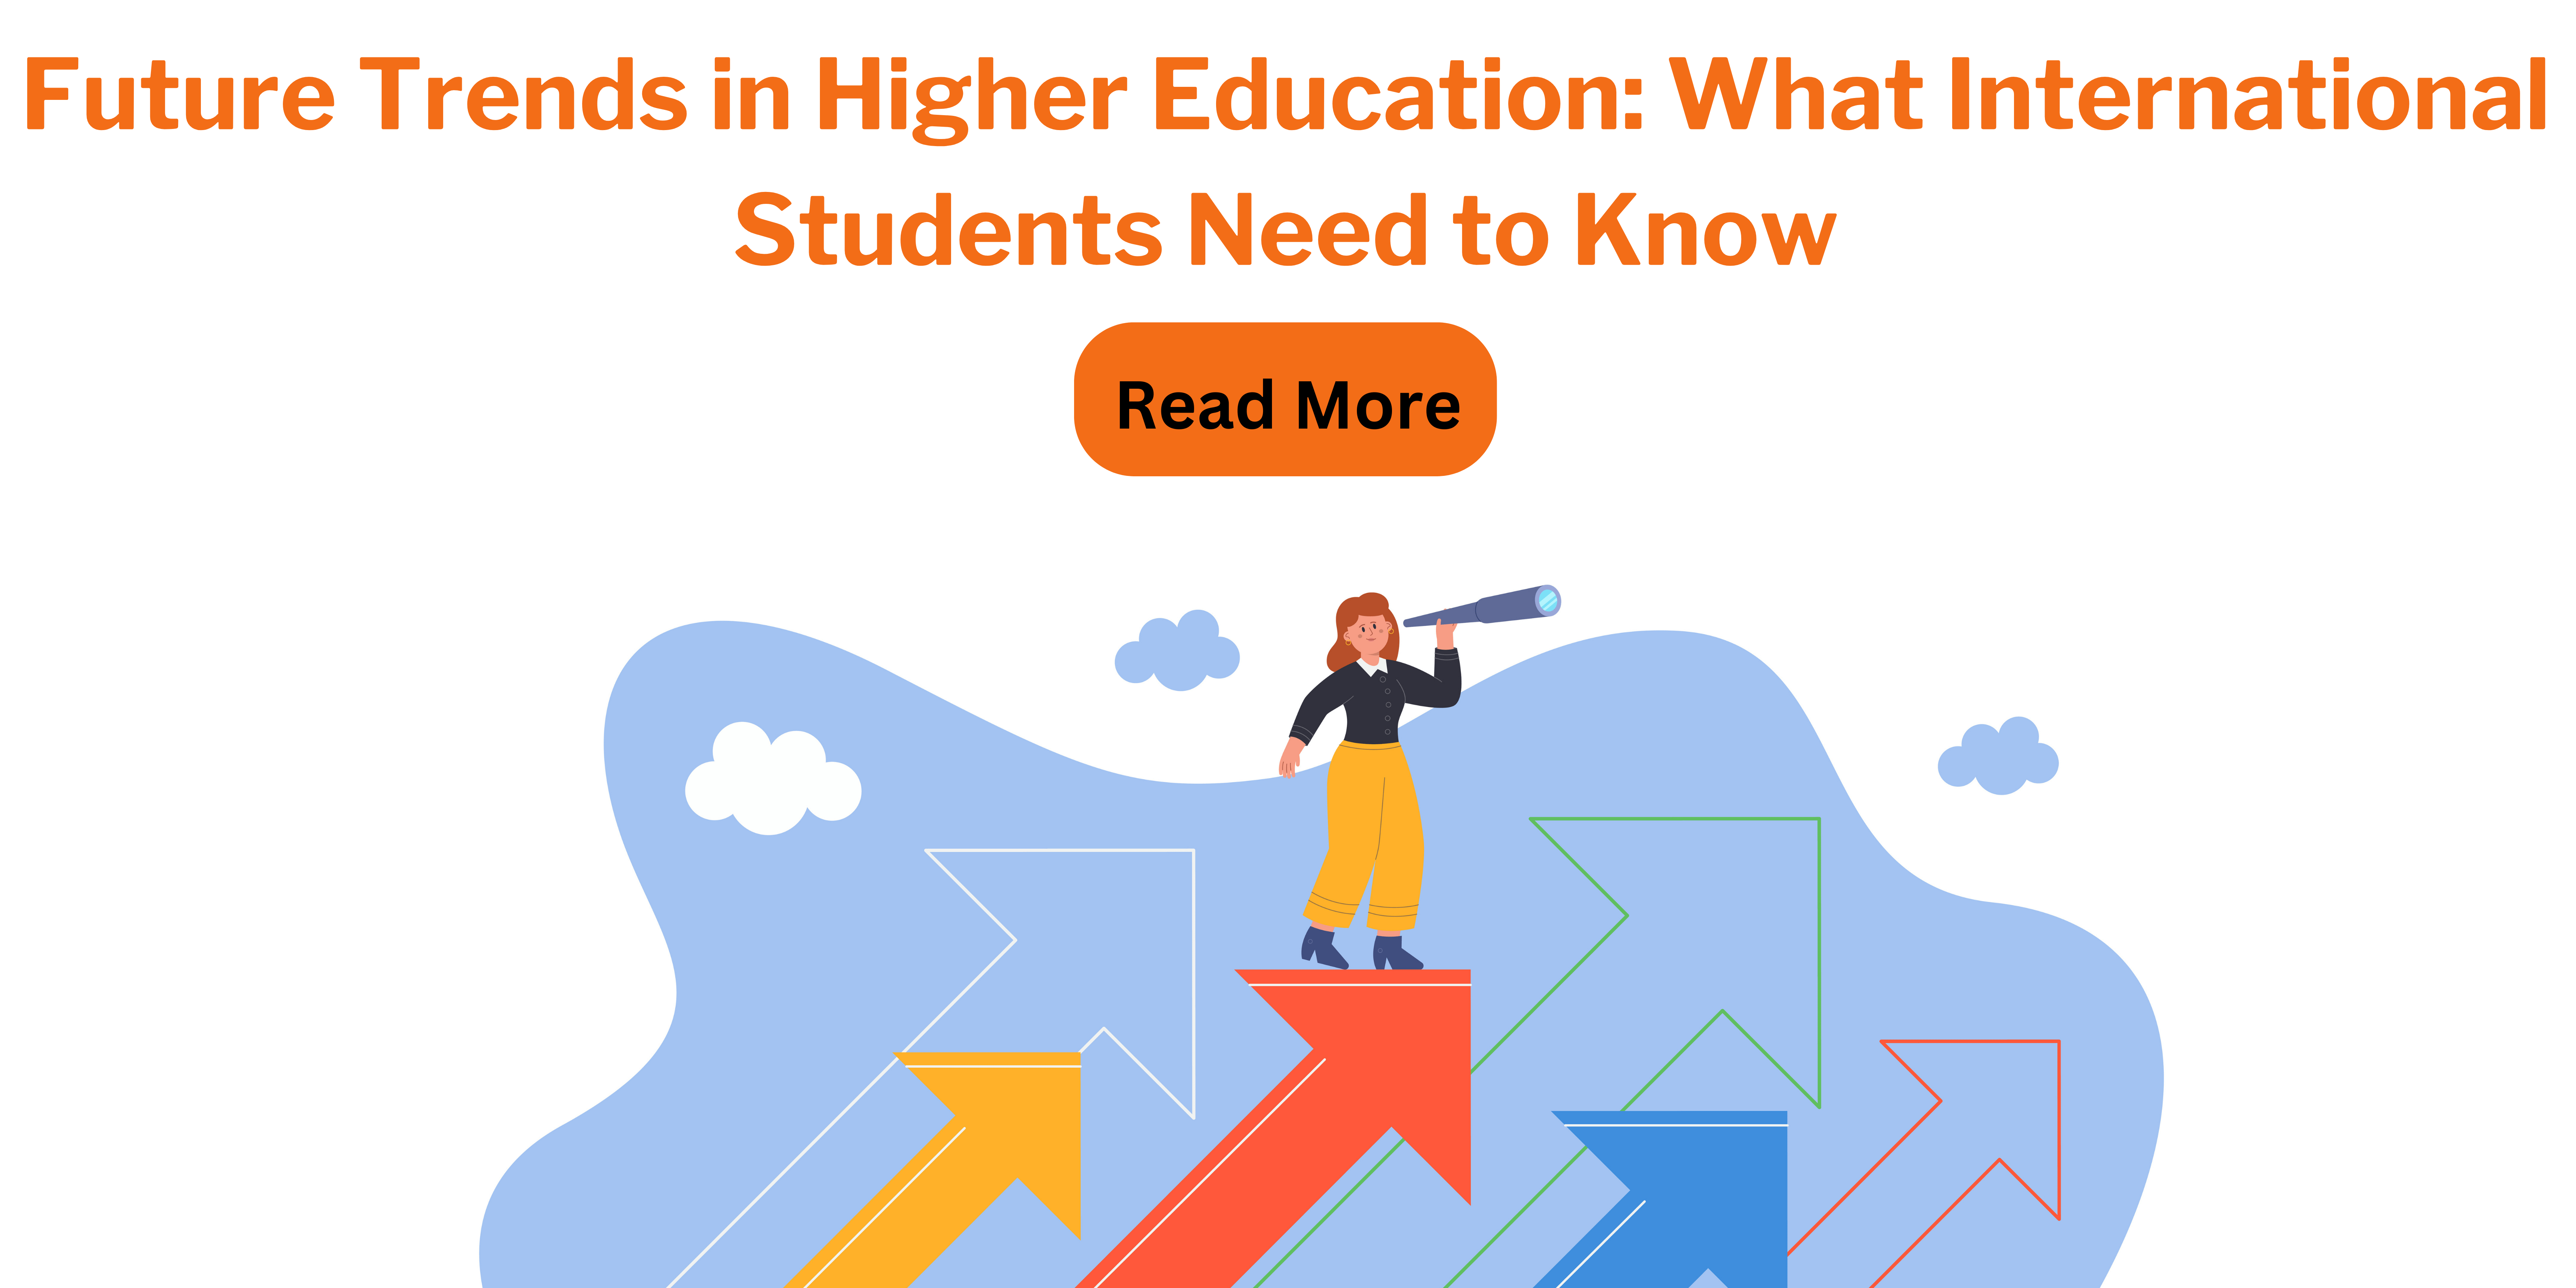 Trends in Higher Education